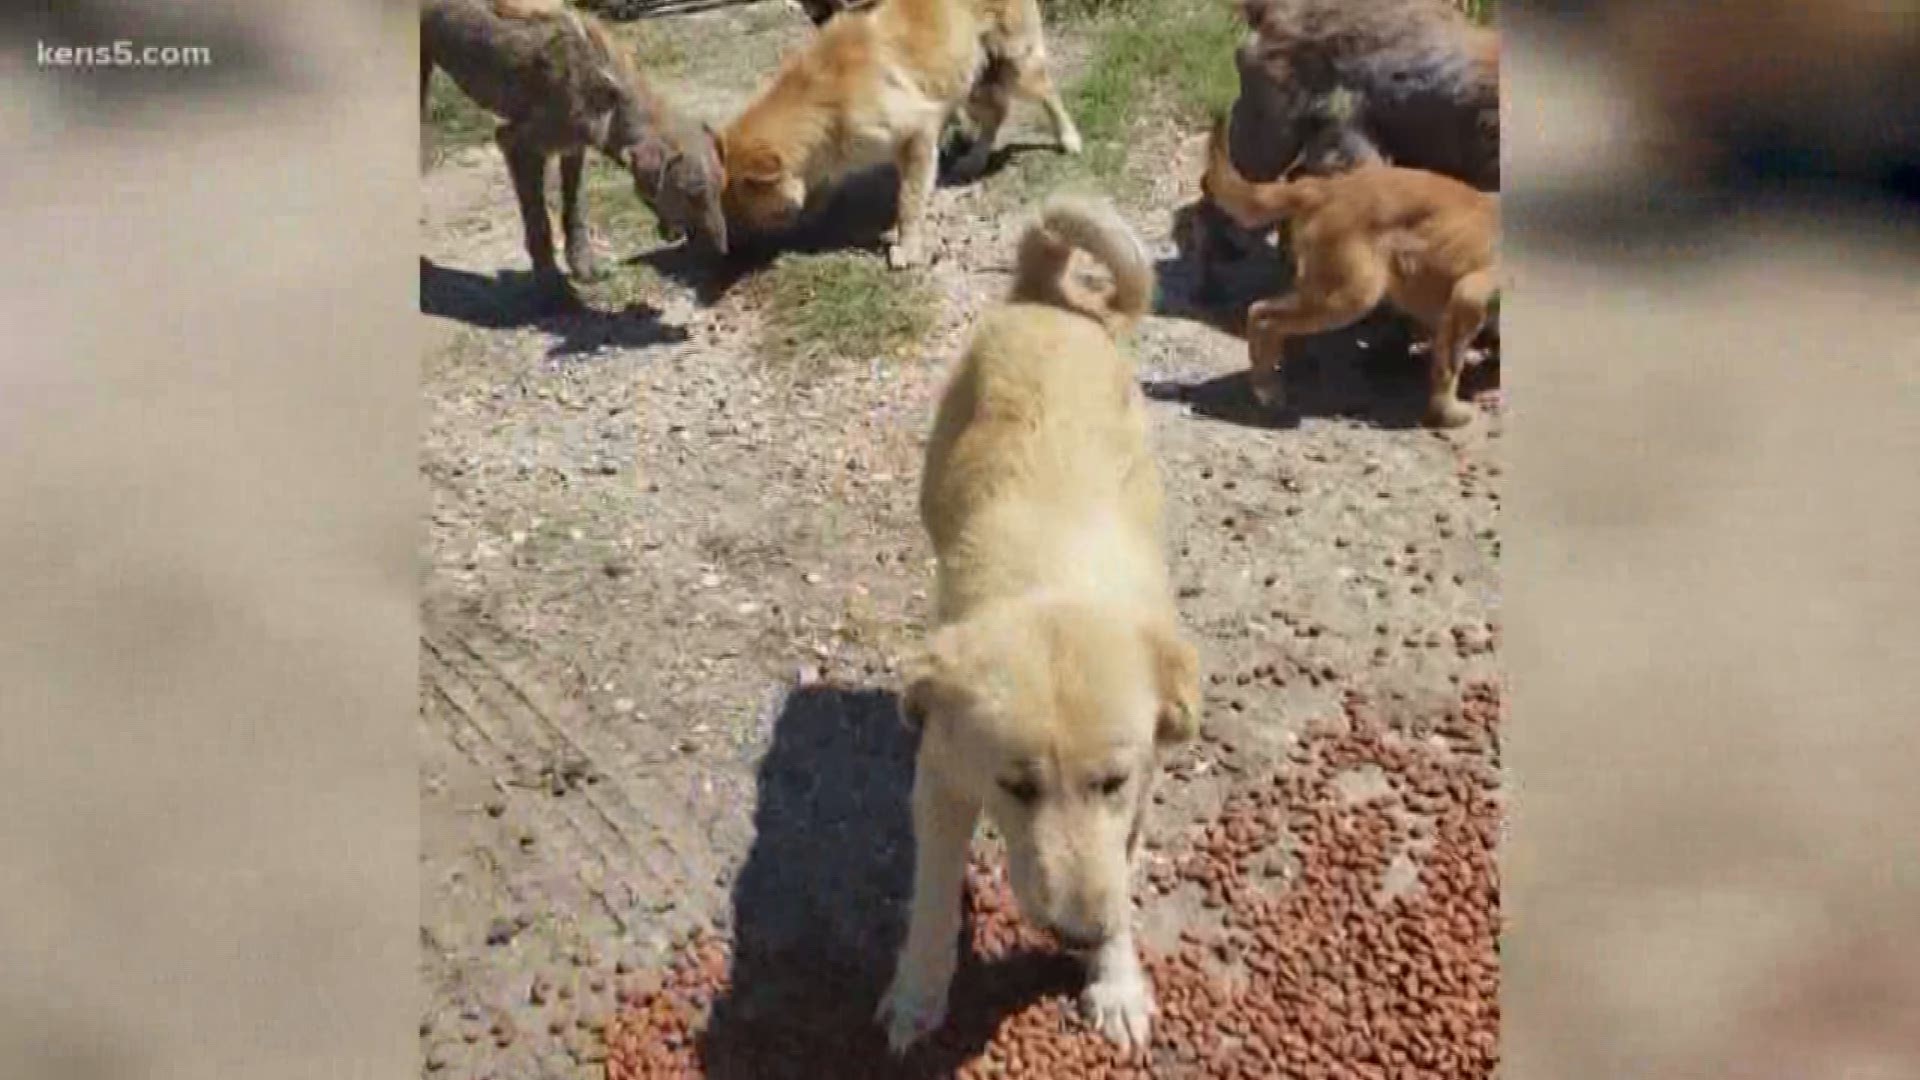 15 dogs found living in horrible conditions 